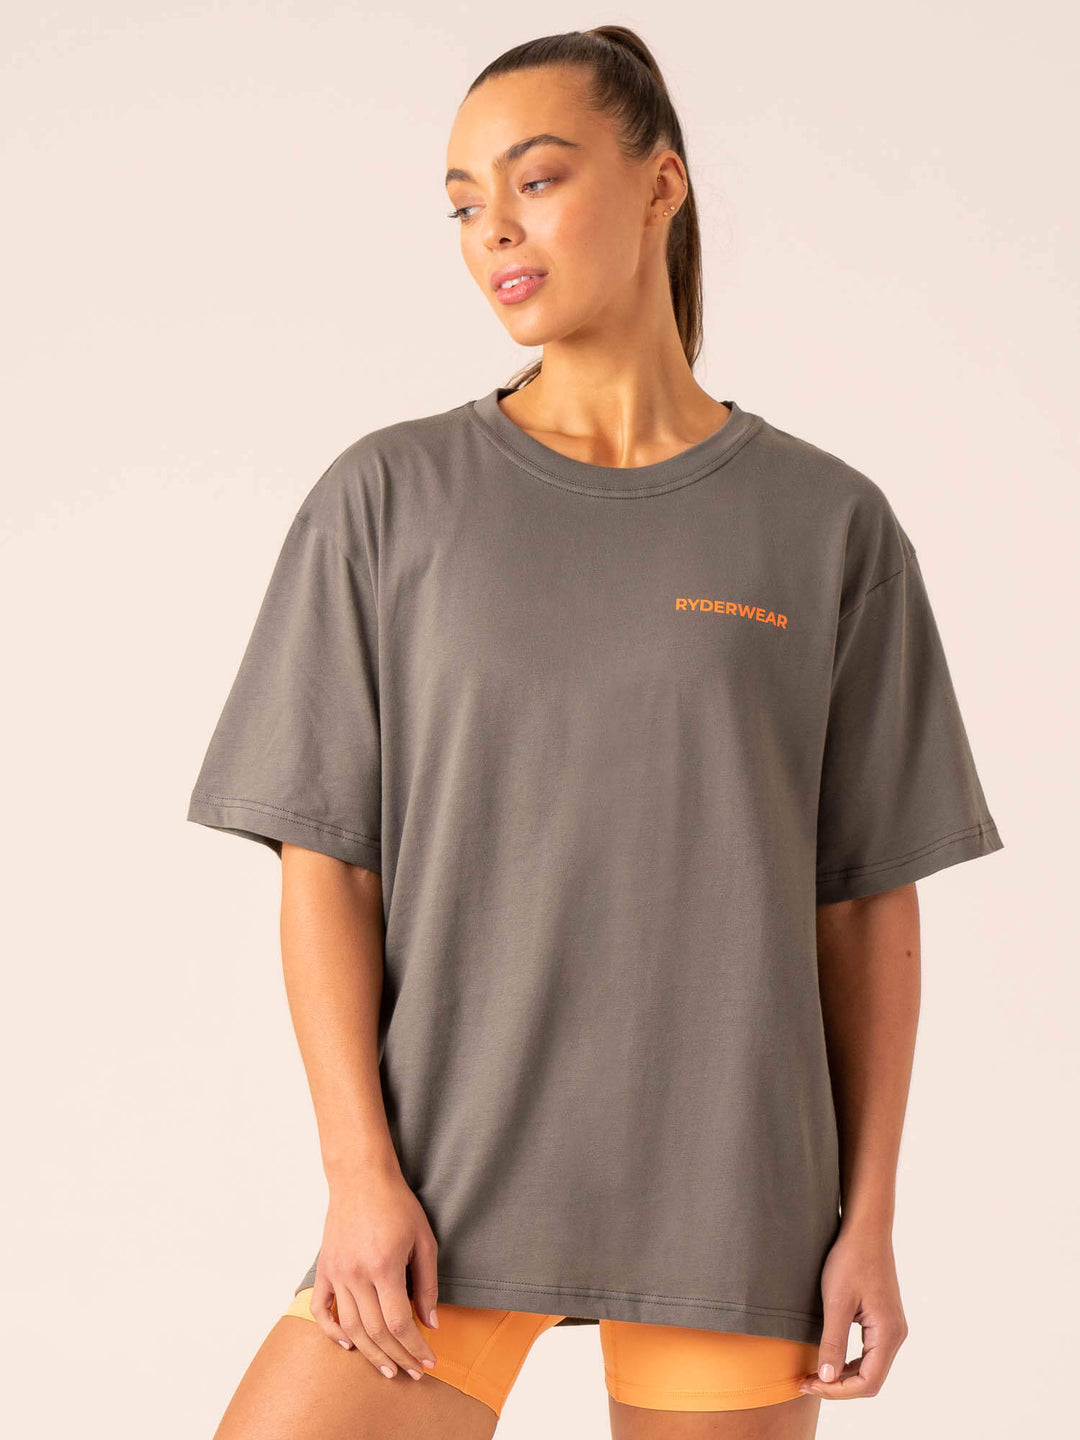 Industry Oversized T-Shirt - Charcoal Clothing Ryderwear 